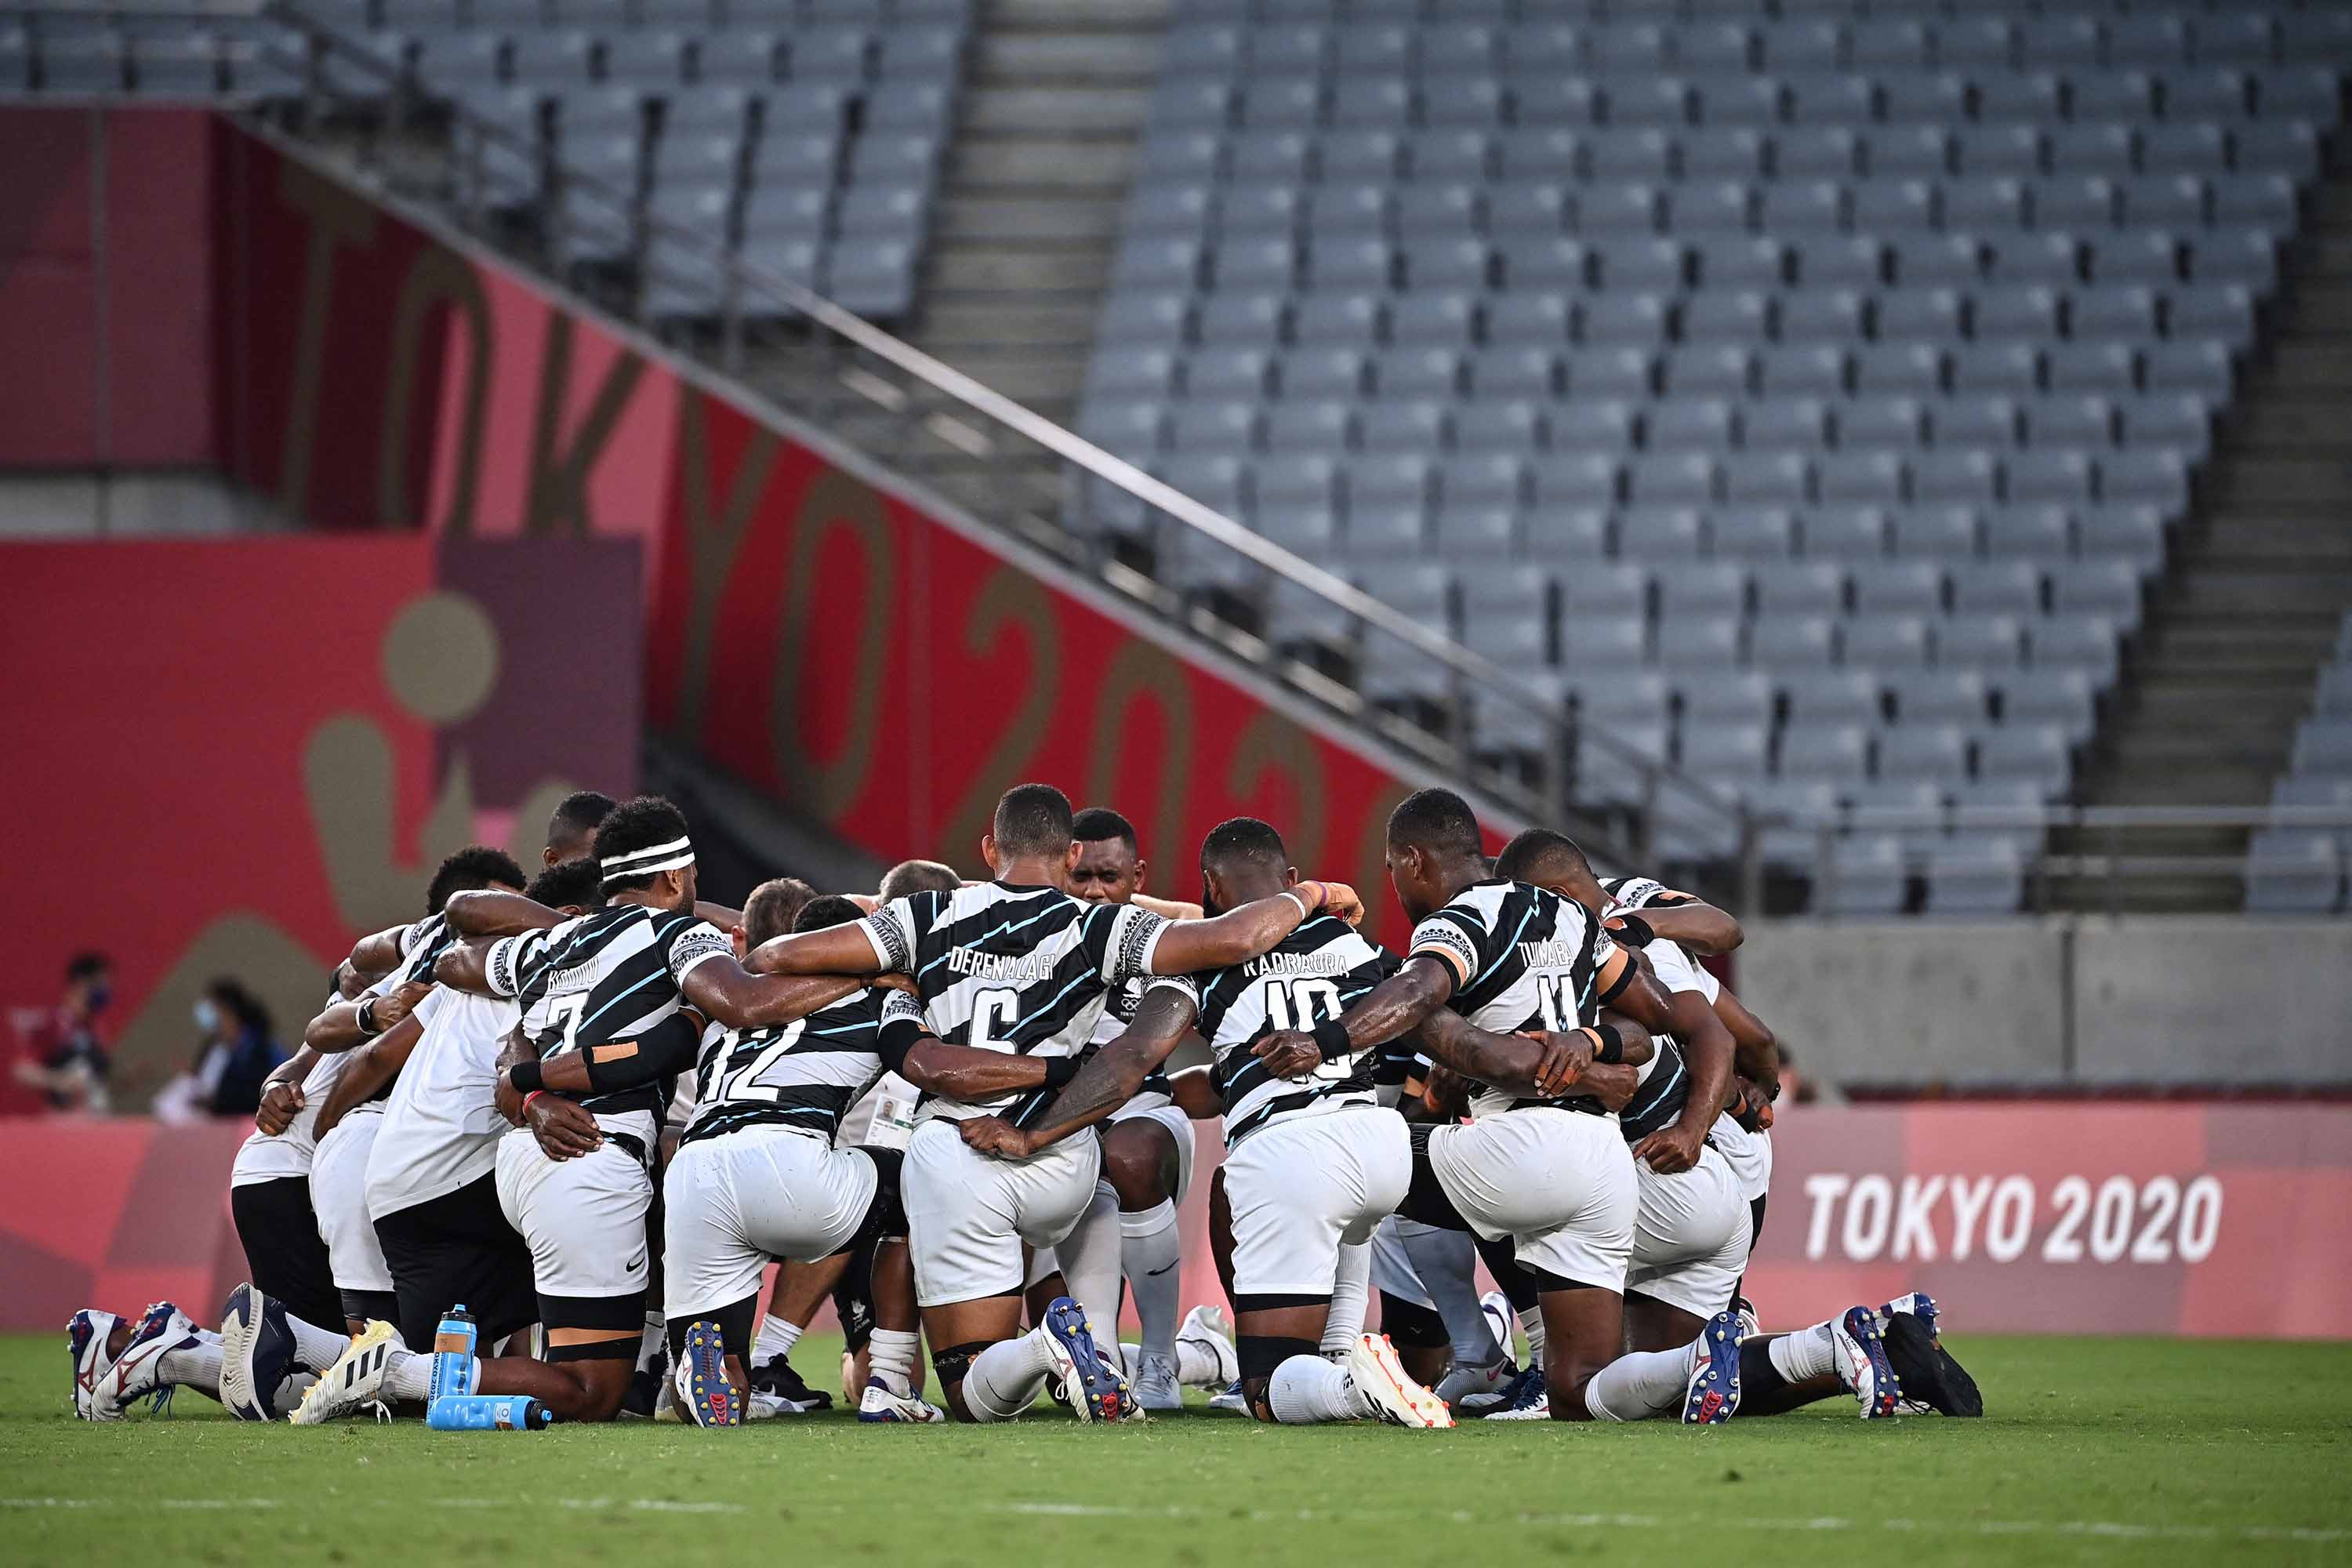 Members of Team Fiji react after winning the men's final rugby sevens match on Wednesday.